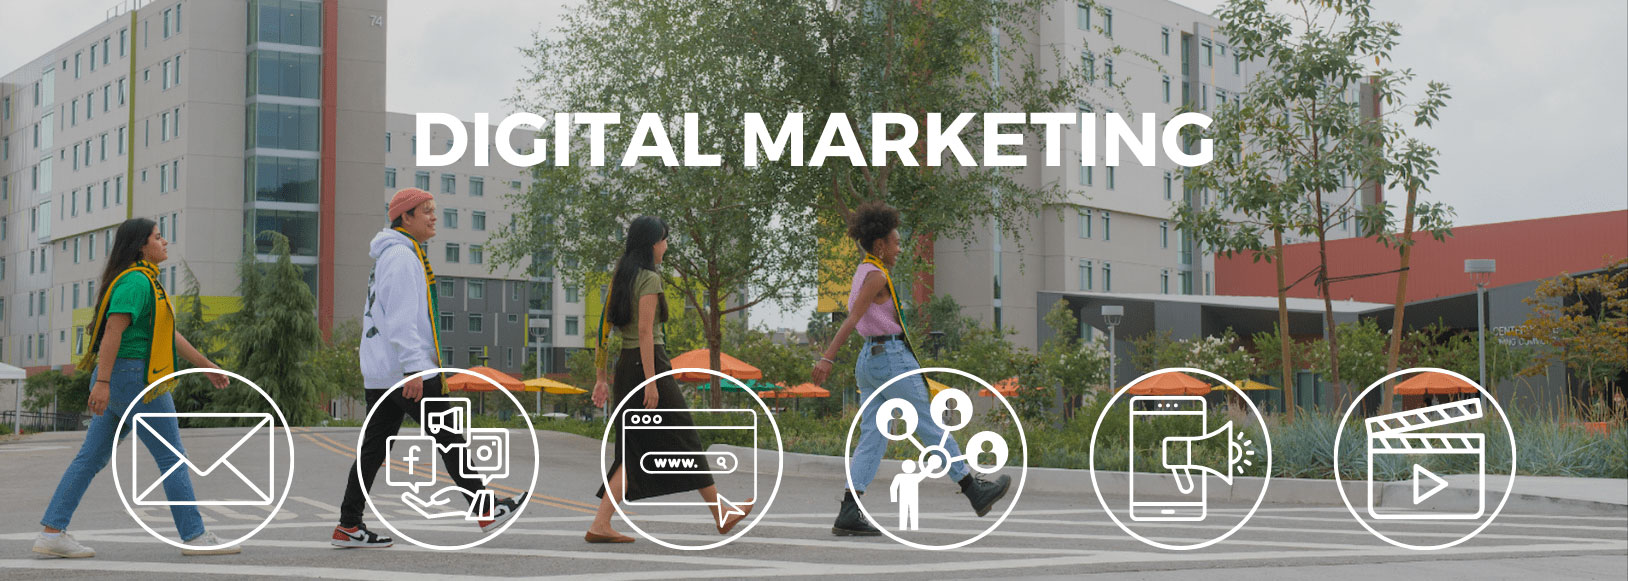 students walking across street with digital marketing icons